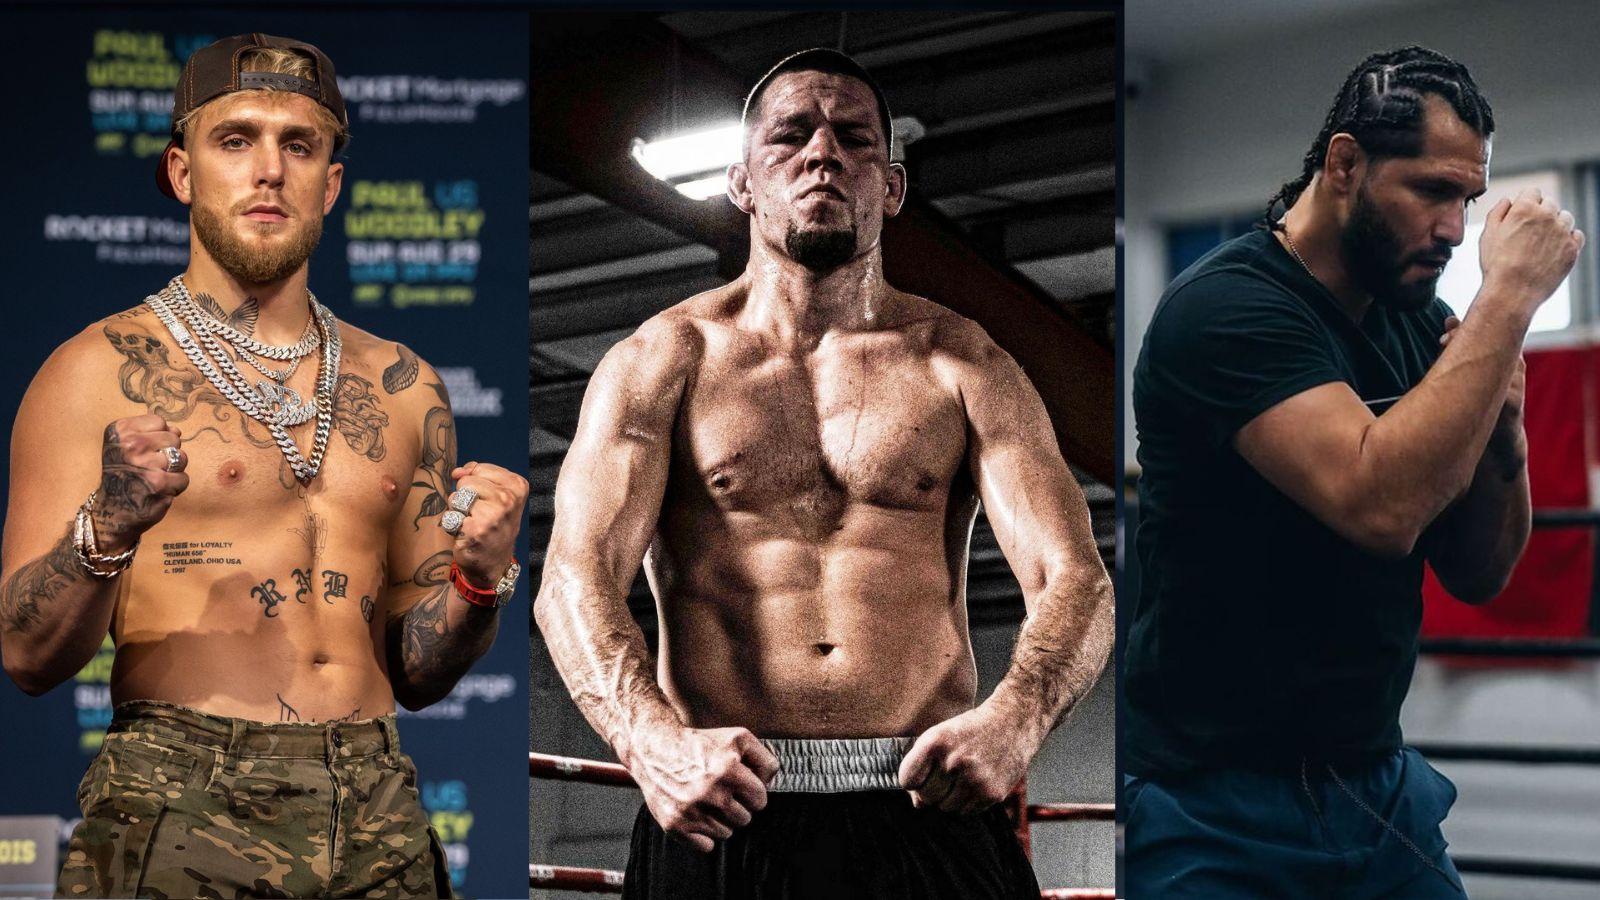 Jake Paul (left) and Nate Diaz (center) and Jorge Masvidal (right).